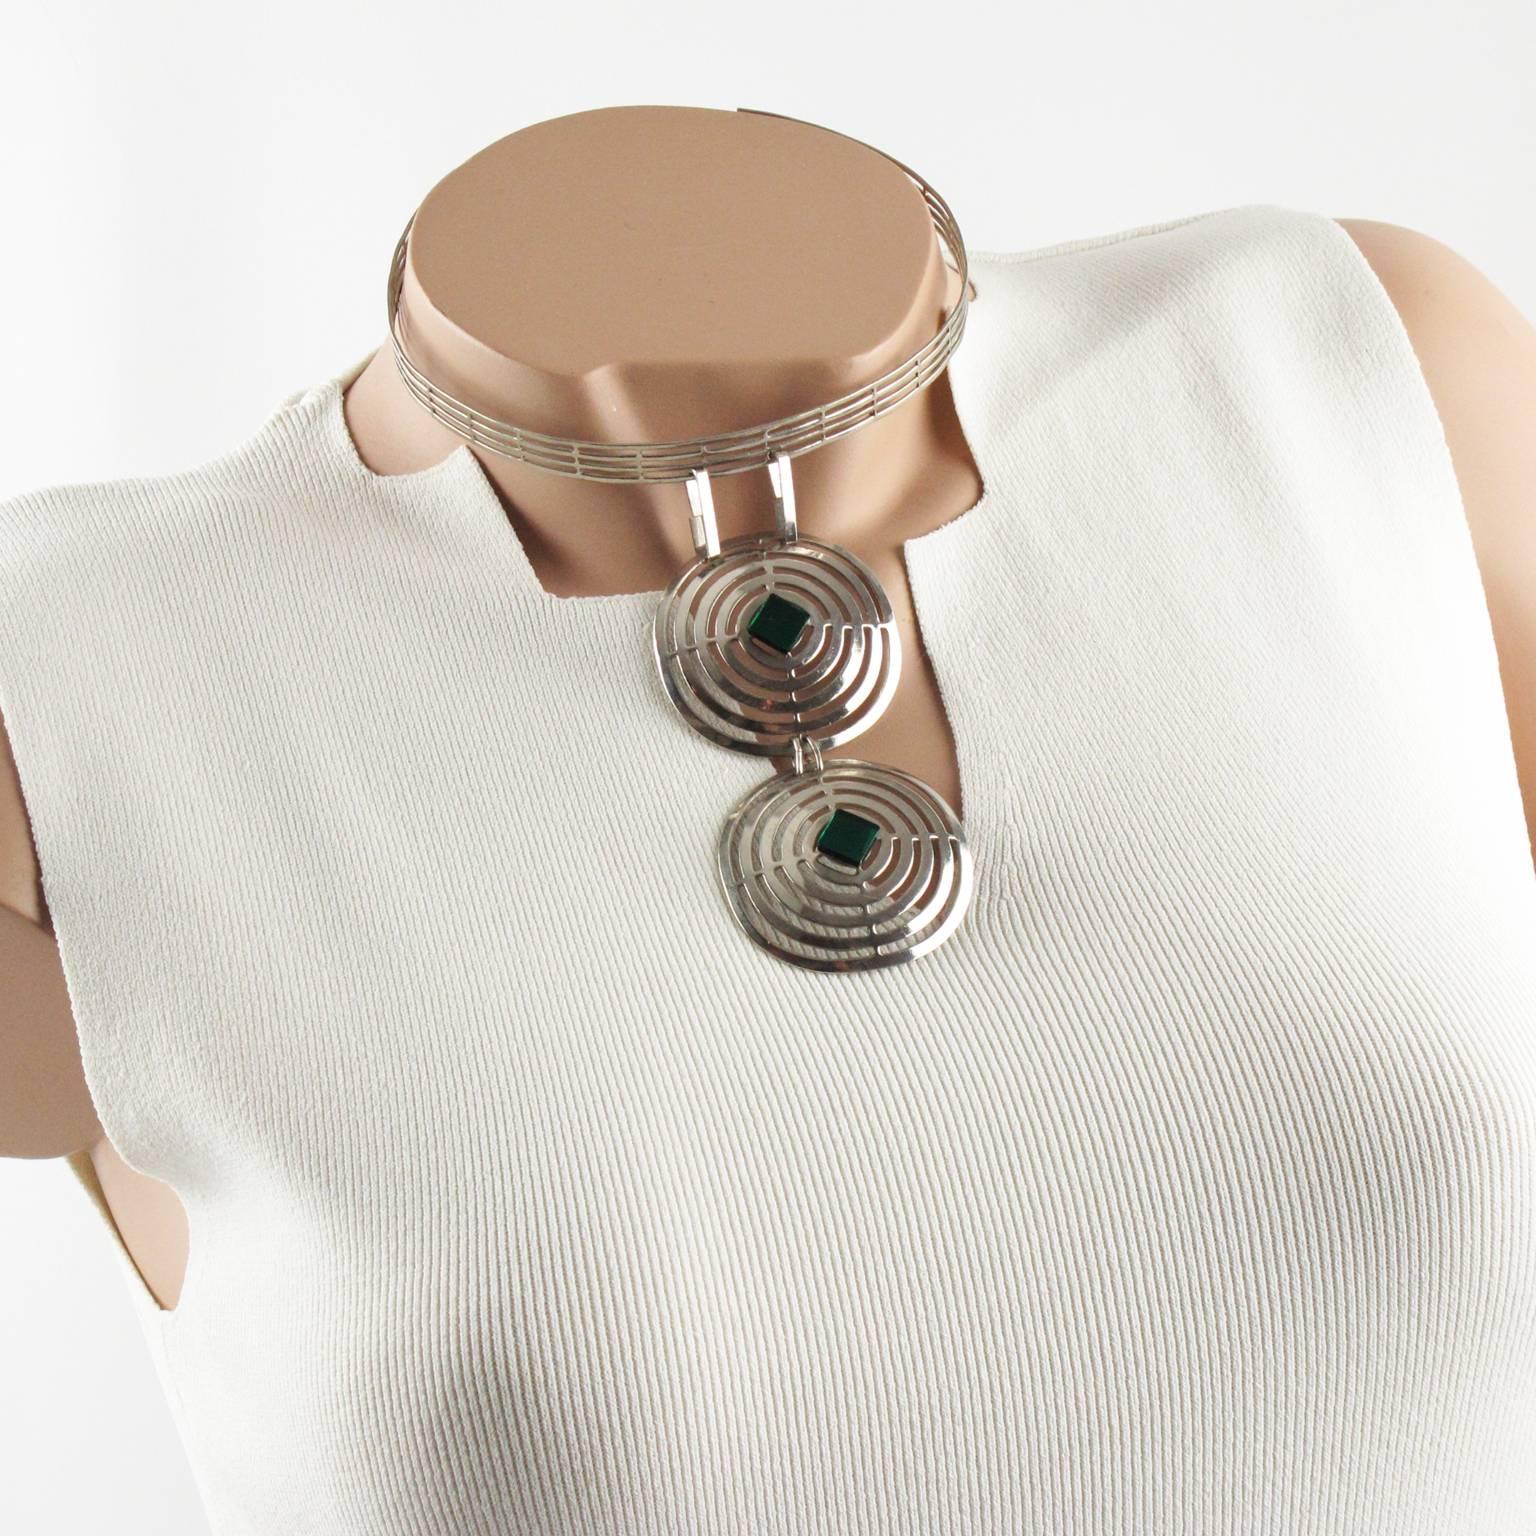 Stunning Mid Century minimalist Space Age dog collar necklace. Featuring a chromed metal rigid neck band with pierced and see thru carved pattern, ornate with a long geometric pendant. Two round domed discs with same carved pattern topped with